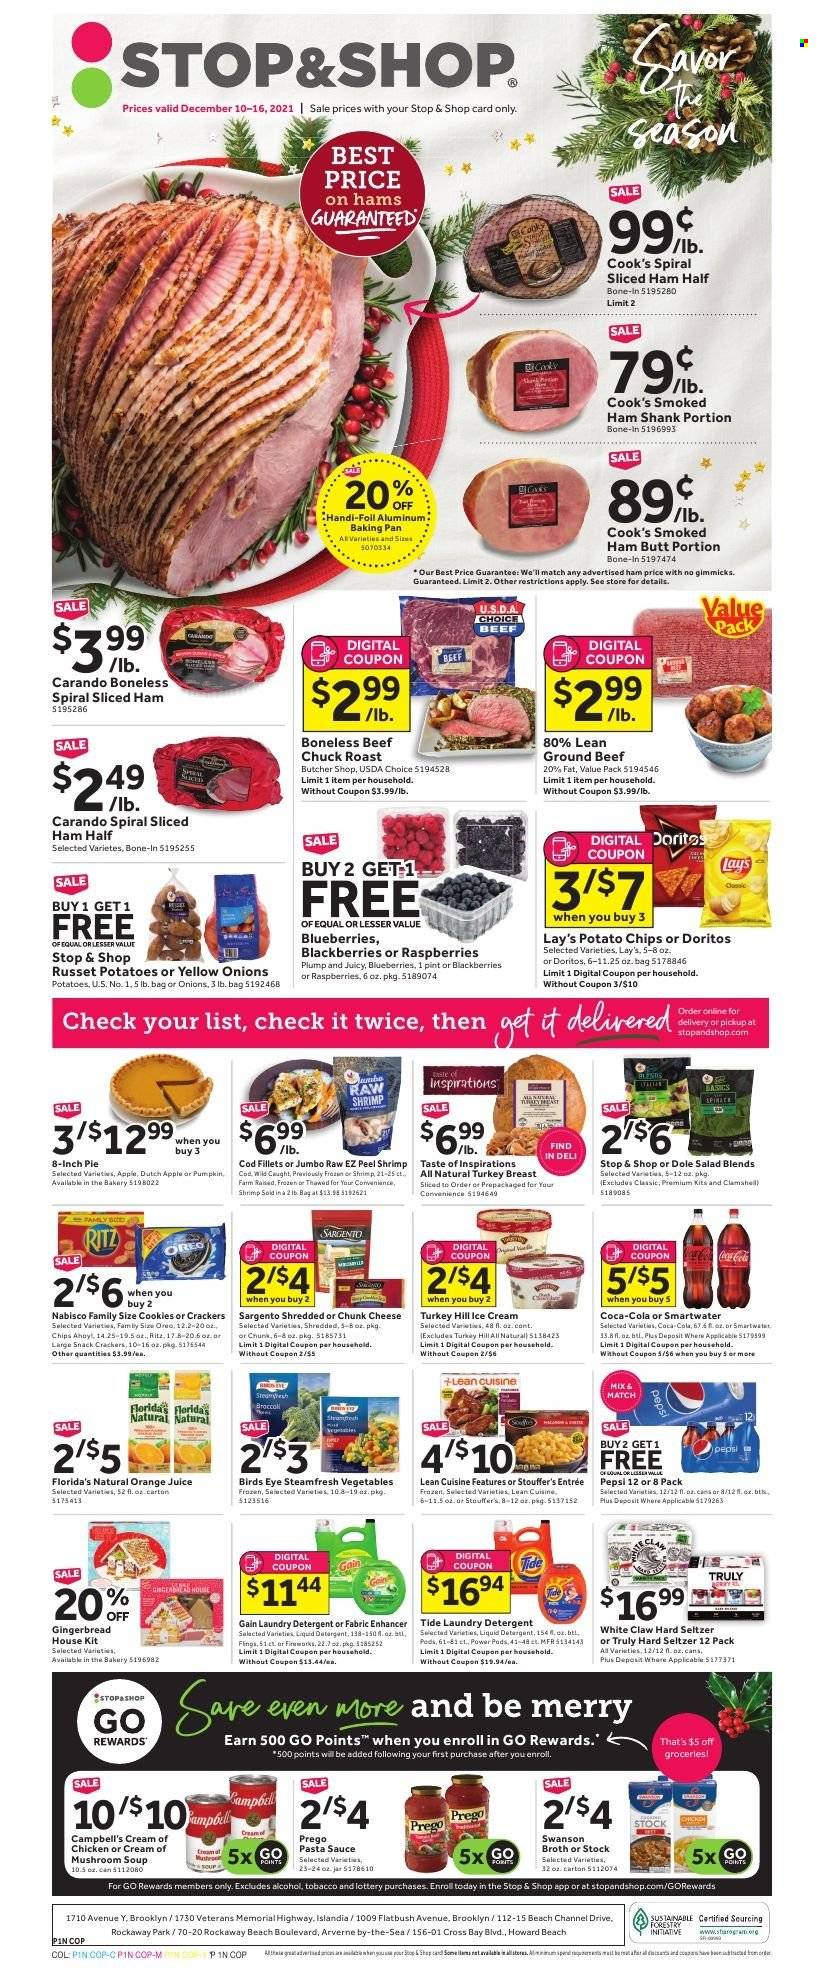 thumbnail - Stop & Shop Flyer - 12/10/2021 - 12/16/2021 - Sales products - pie, gingerbread, broccoli, russet potatoes, salad, Dole, blackberries, blueberries, turkey breast, beef meat, ground beef, chuck roast, cod, shrimps, Campbell's, mushroom soup, pasta sauce, soup, sauce, Bird's Eye, Lean Cuisine, ham, ham shank, smoked ham, Cook's, cheese, chunk cheese, Sargento, Oreo, ice cream, Stouffer's, cookies, snack, crackers, Florida's Natural, RITZ, Doritos, potato chips, Lay’s, broth, Coca-Cola, Pepsi, orange juice, juice, Smartwater, White Claw, Hard Seltzer, TRULY, beer, Gain, Tide, liquid detergent, laundry detergent, jar, pin. Page 1.